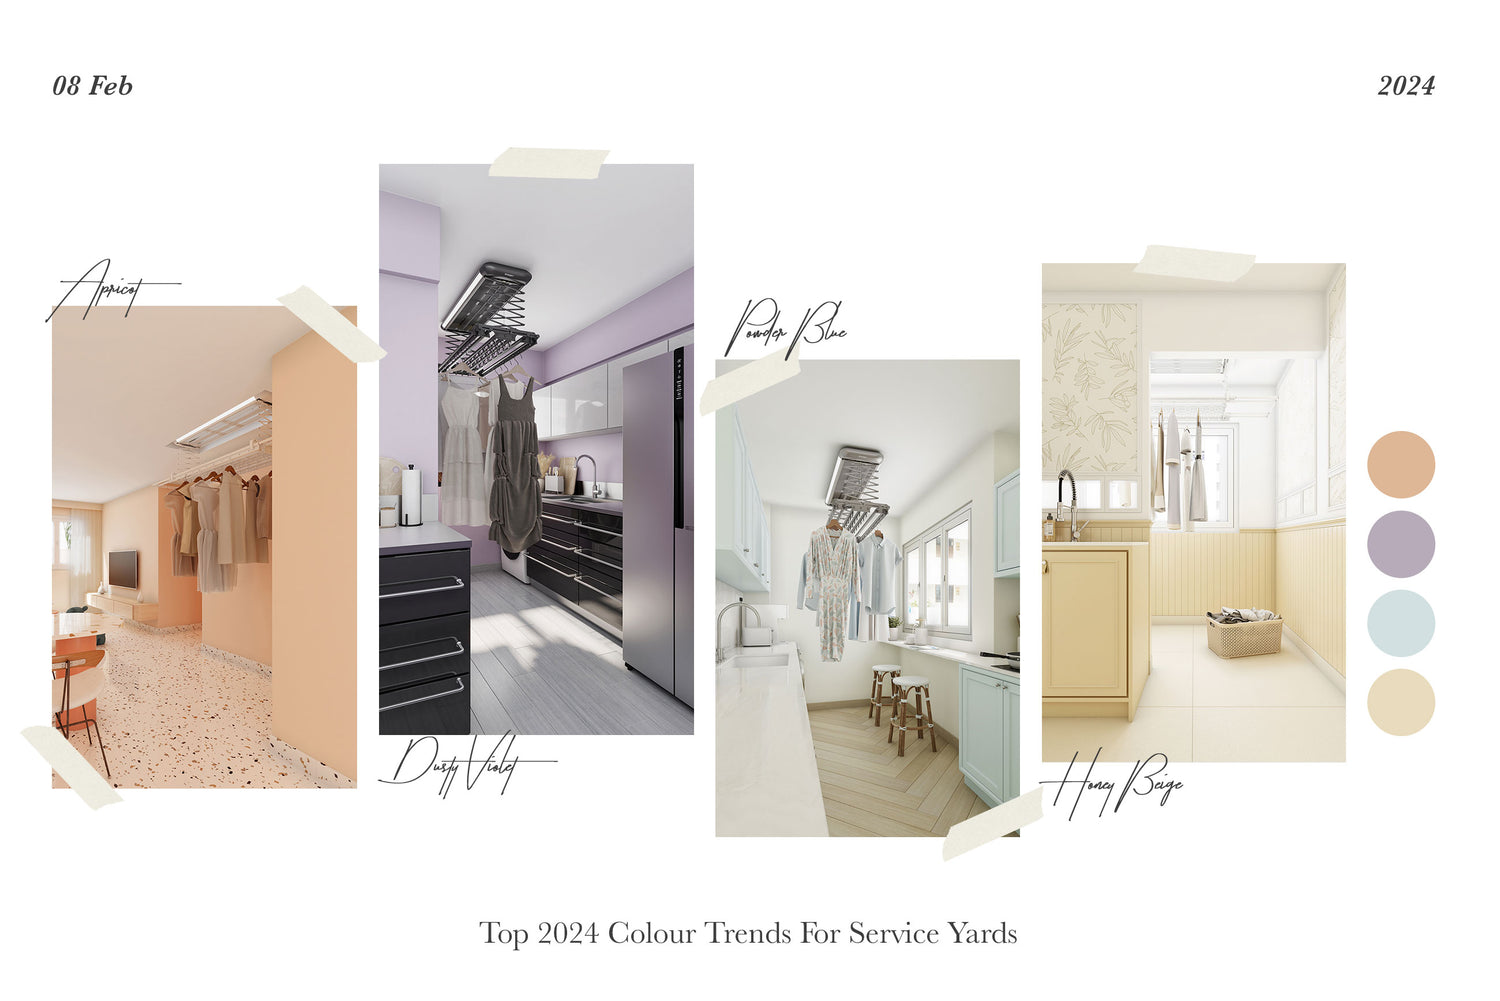 Top 2024 Colour Trends For Service Yards